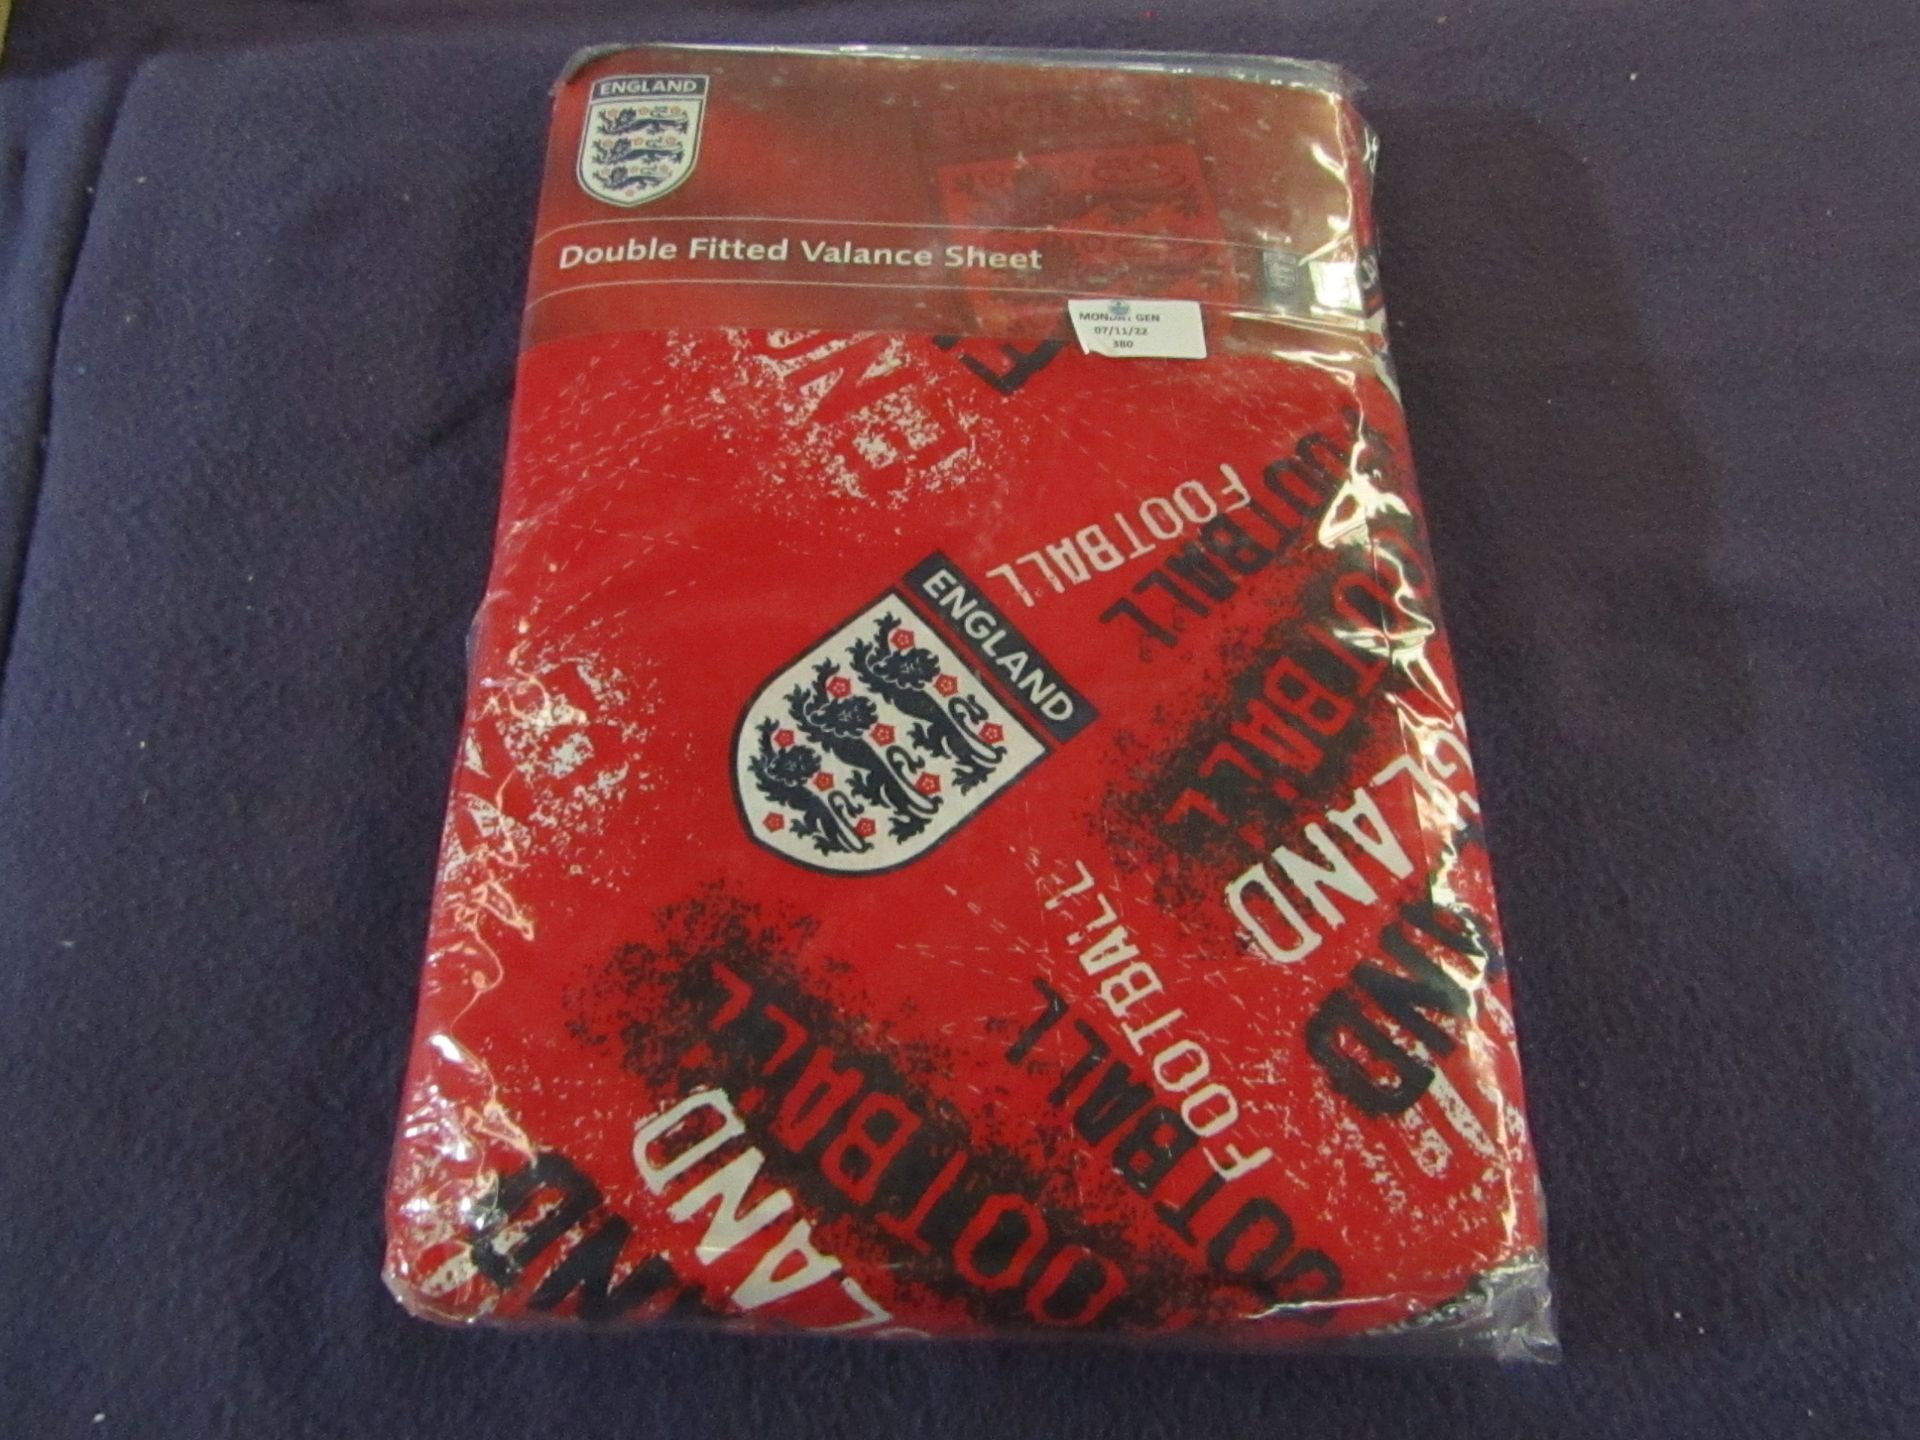 England - Double Fitted Valance Sheet's - Red - Unused & Packaged.